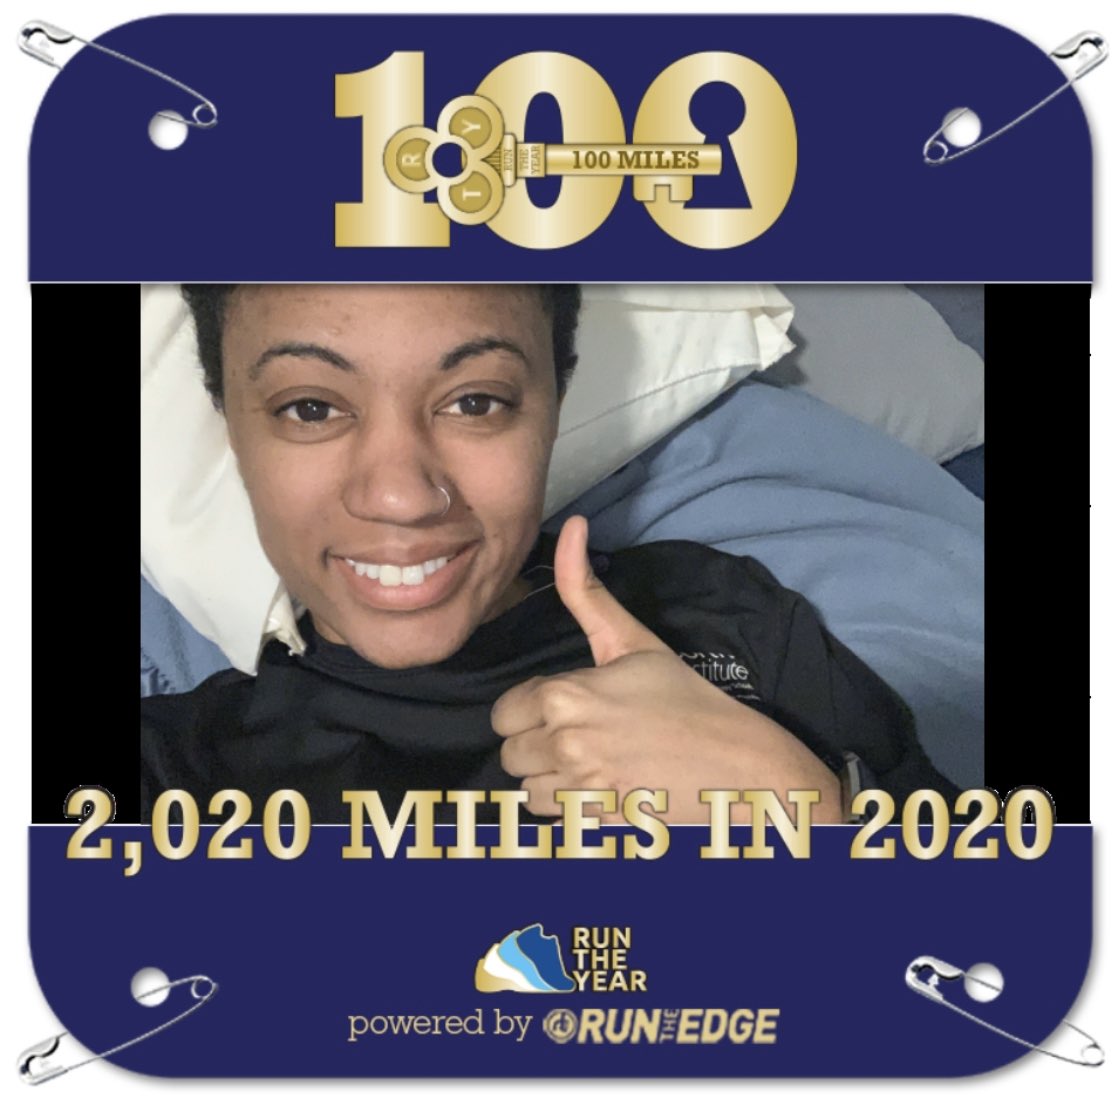 I hit the 100 mile mark today!
Only 1,920 miles to go!
#runtheyear2020